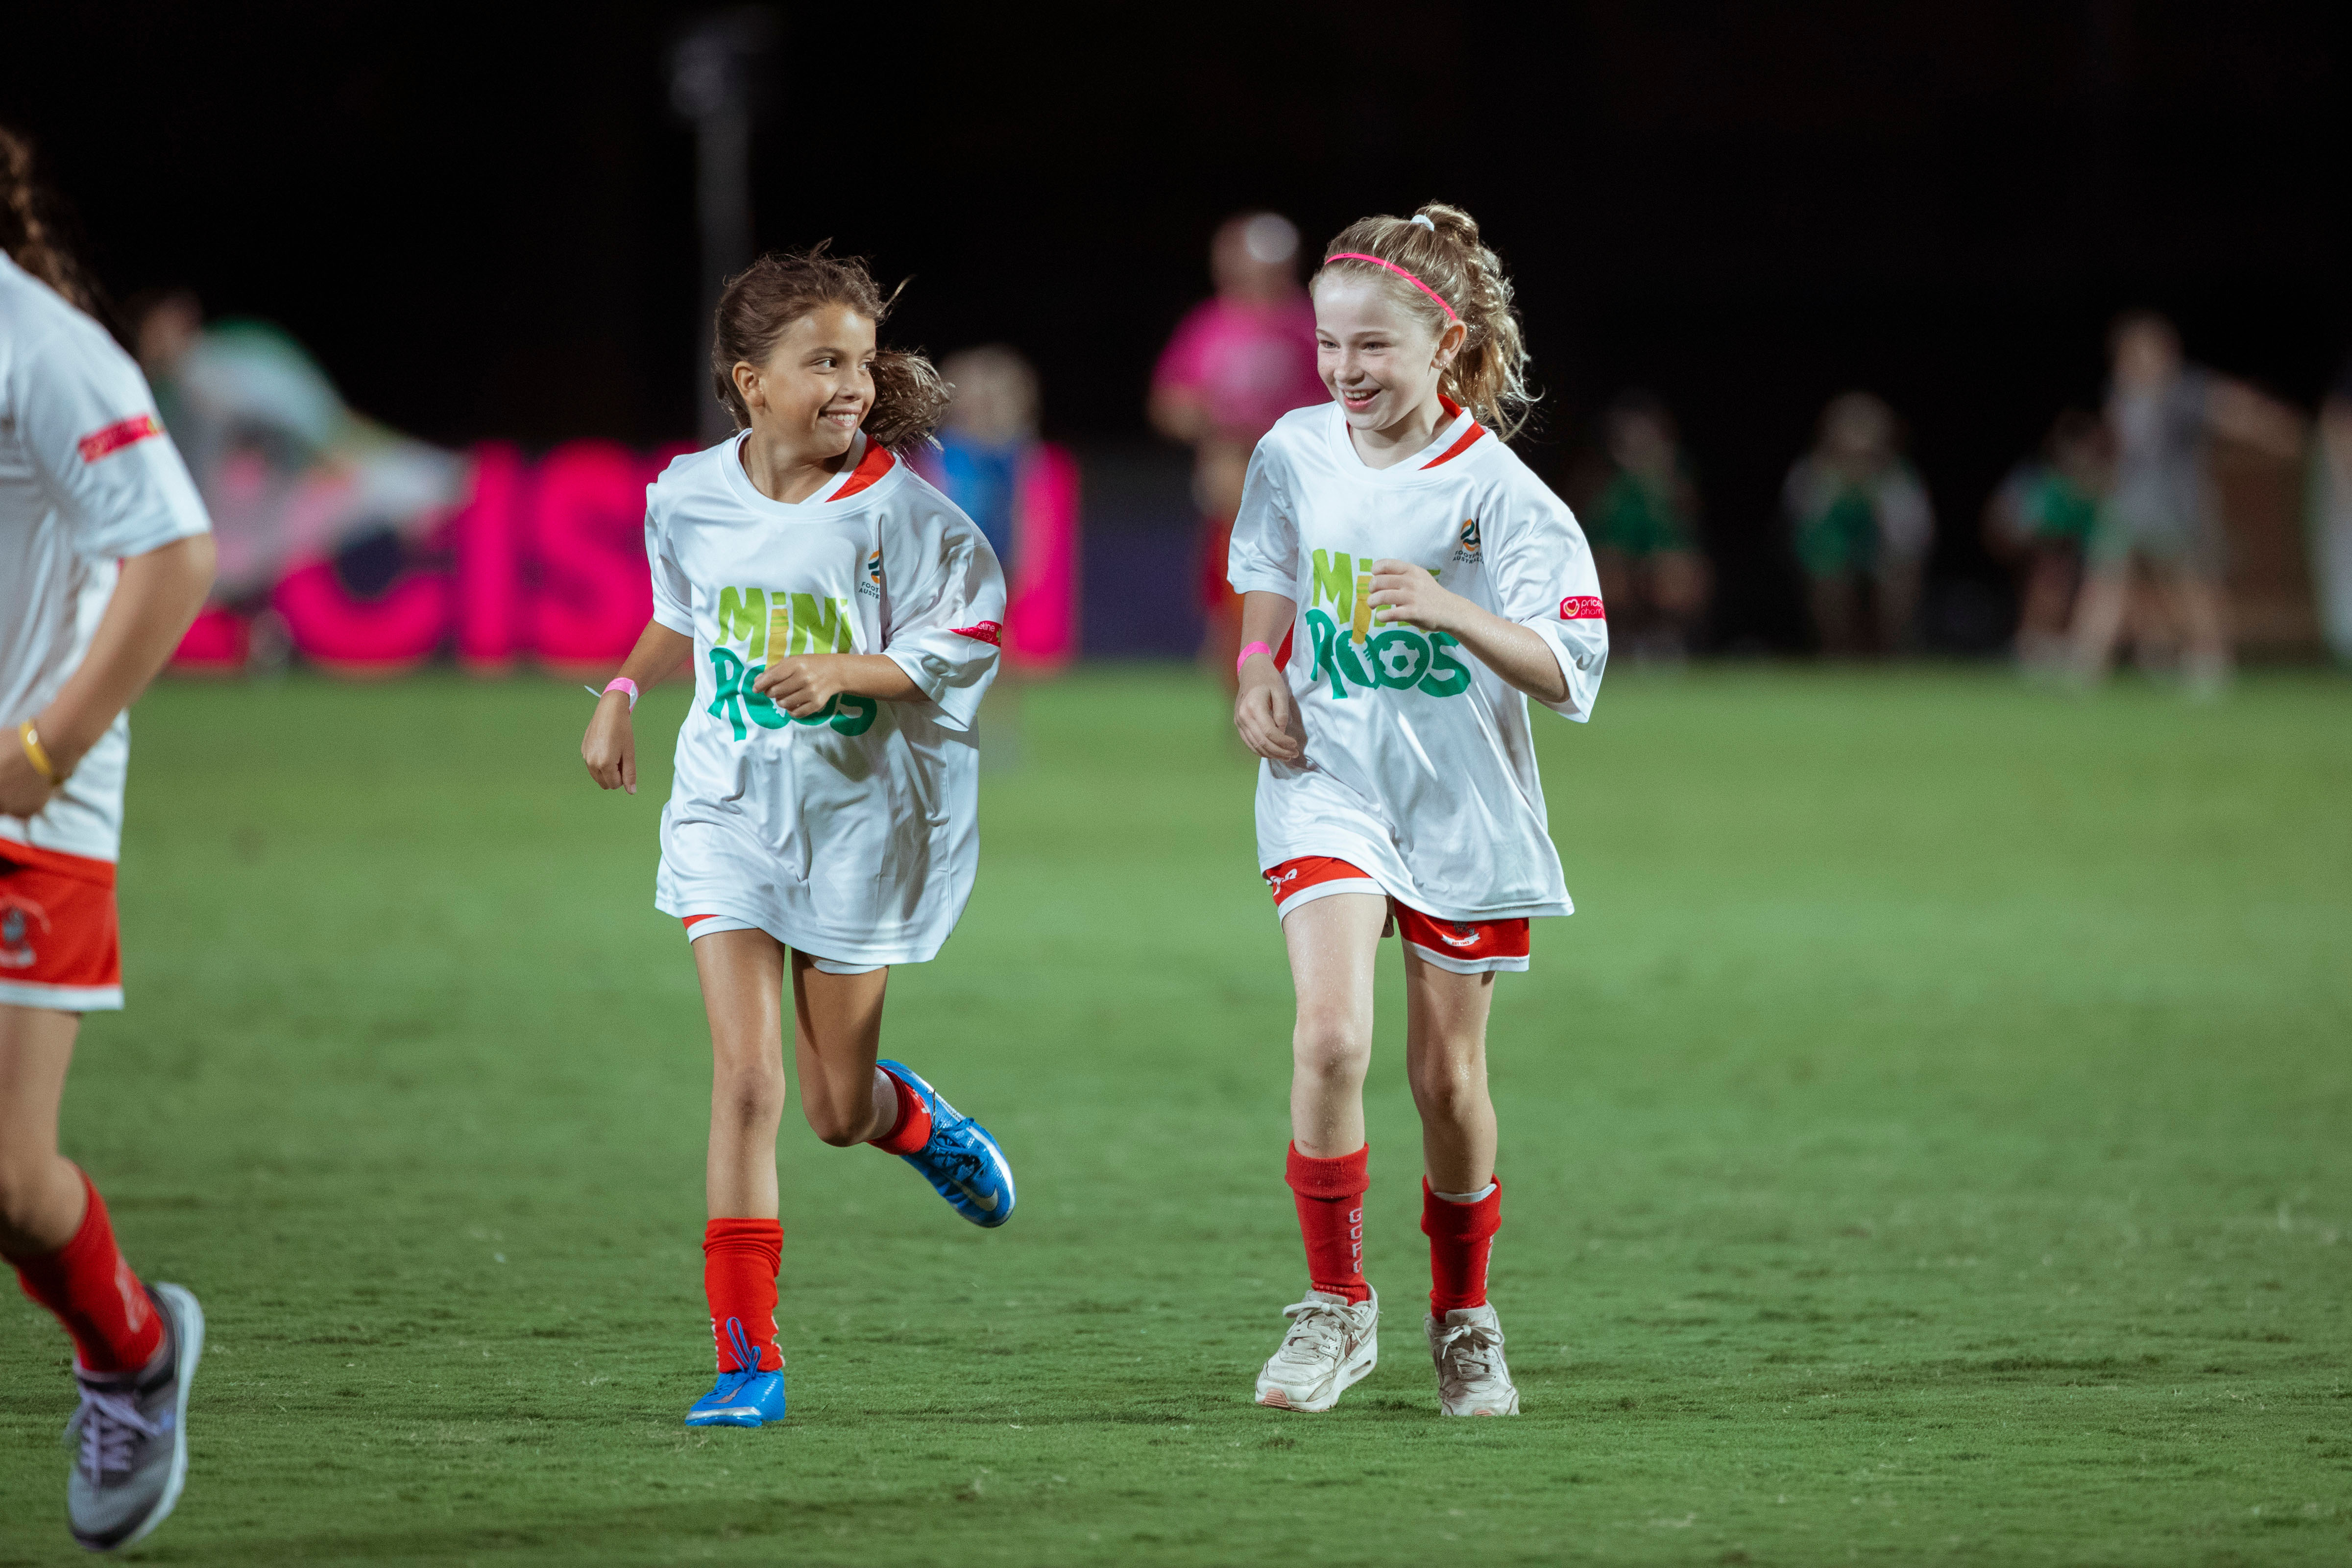 Priceline's MiniRoos Half-Time Heroes during the Cup of Nations. (Photo: Tiffany Williams/Football Australia)